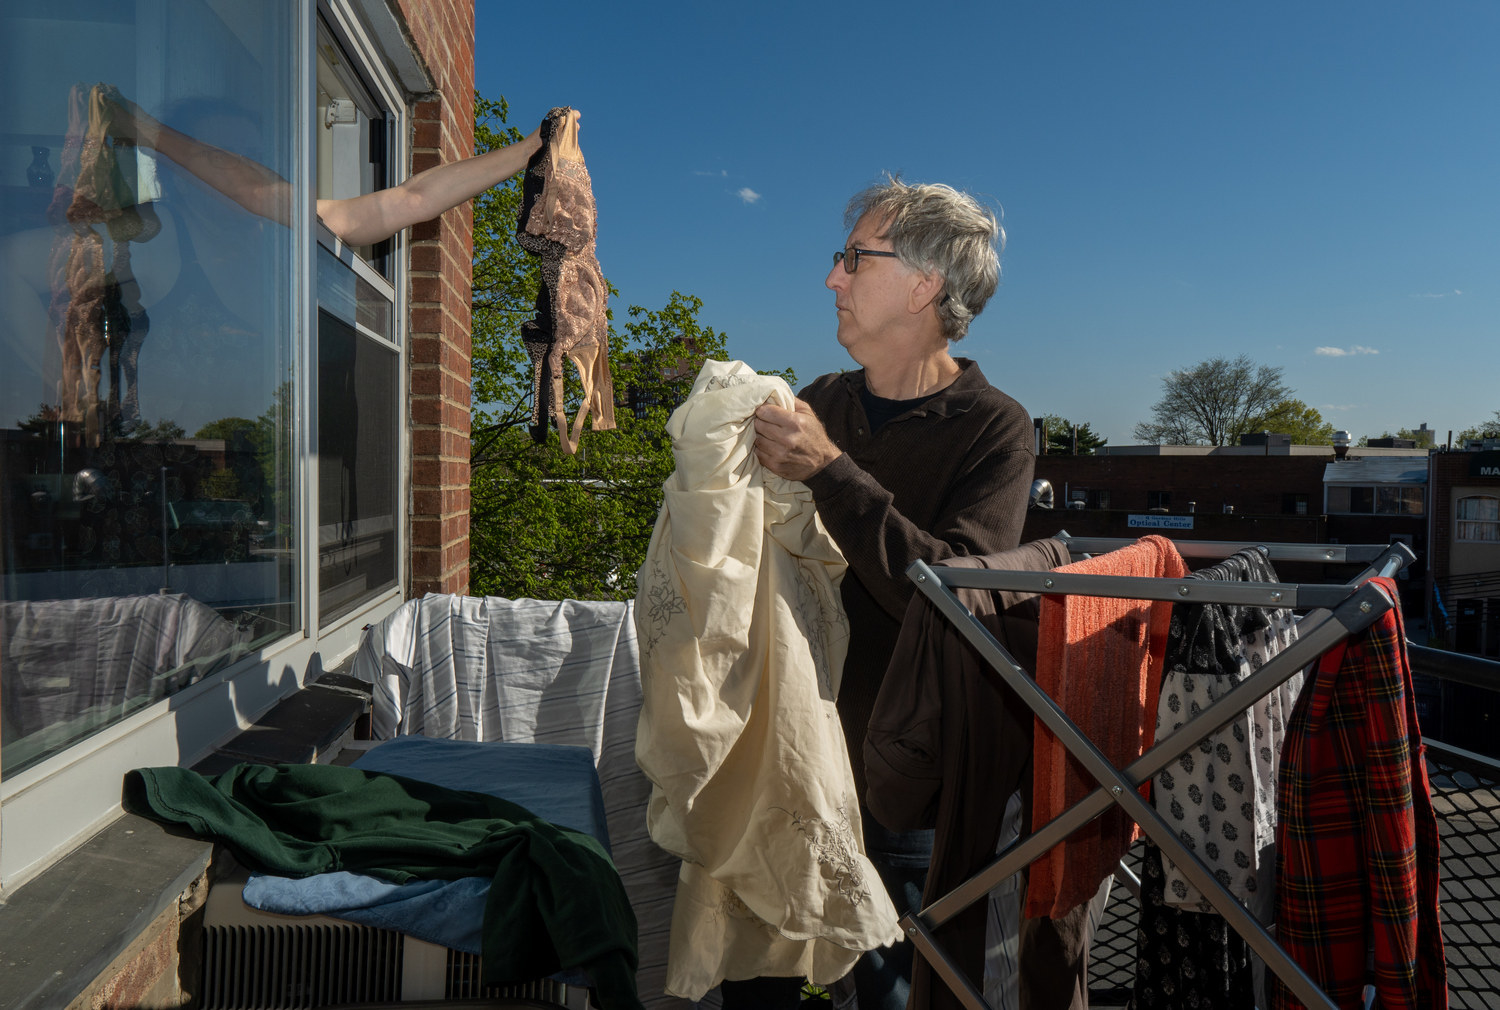 A man drying laundry on the balcony while a woman hands him bras out the window